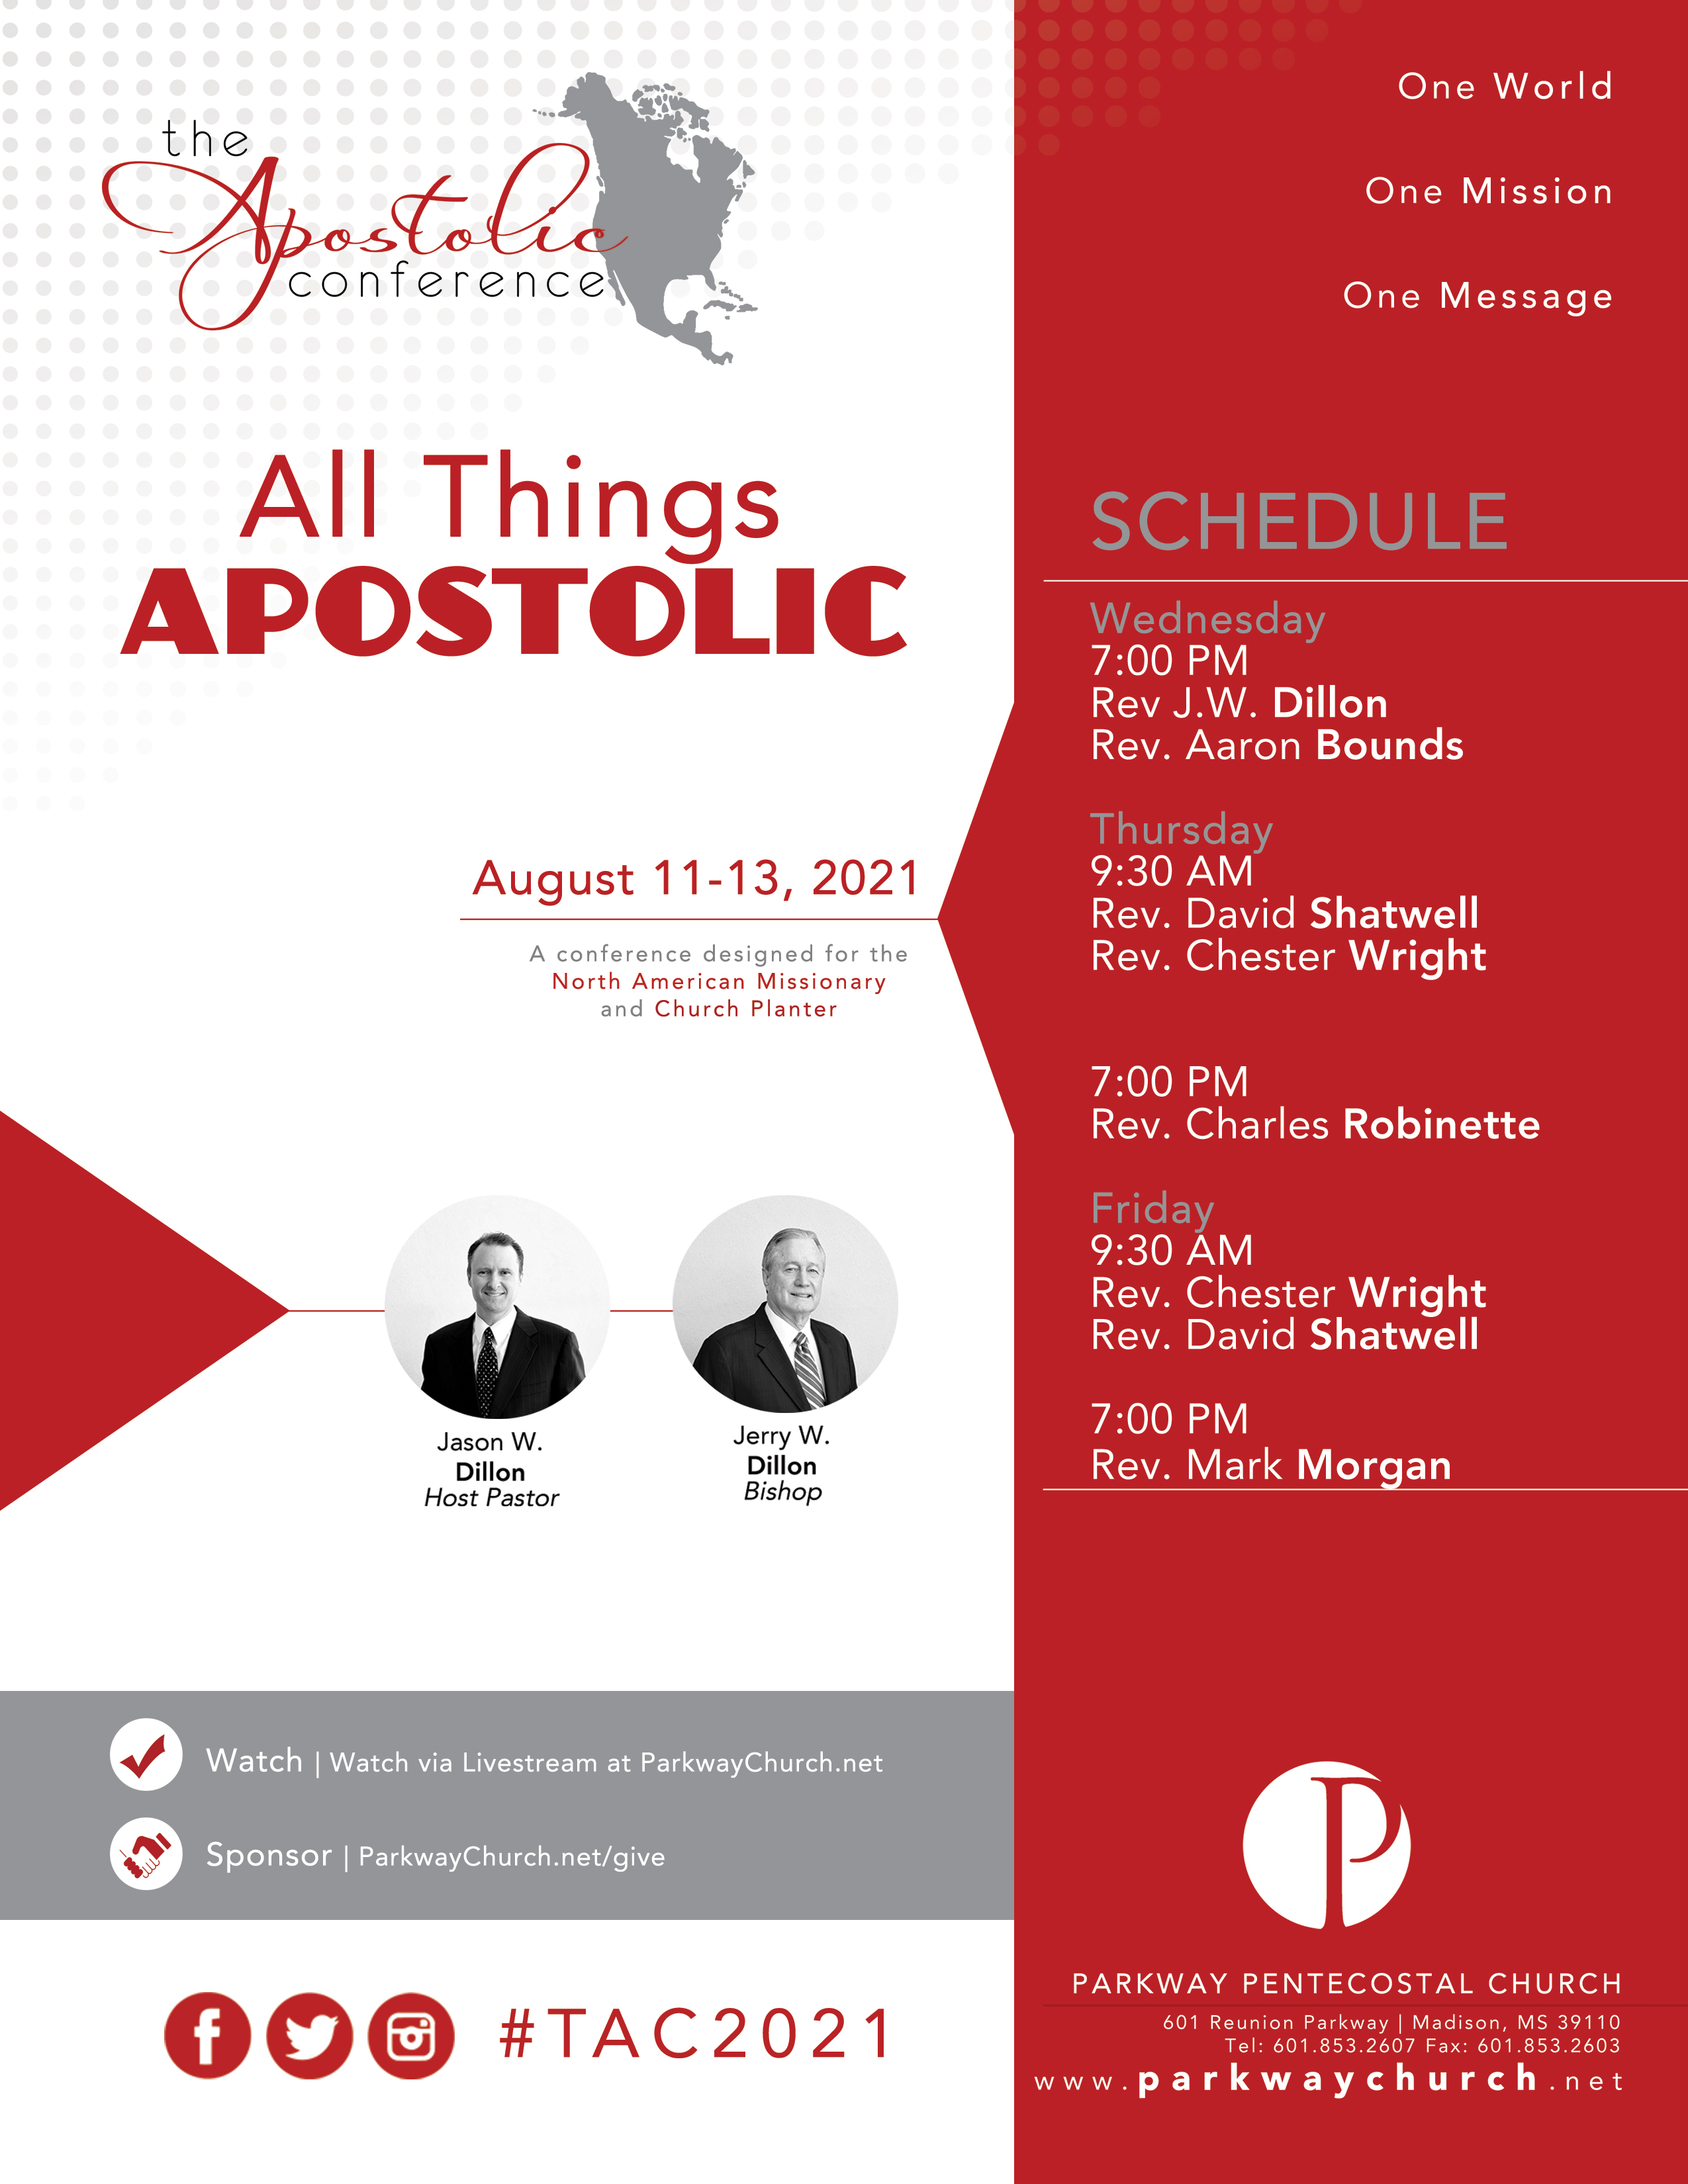 Advertisements - The Apostolic Conference